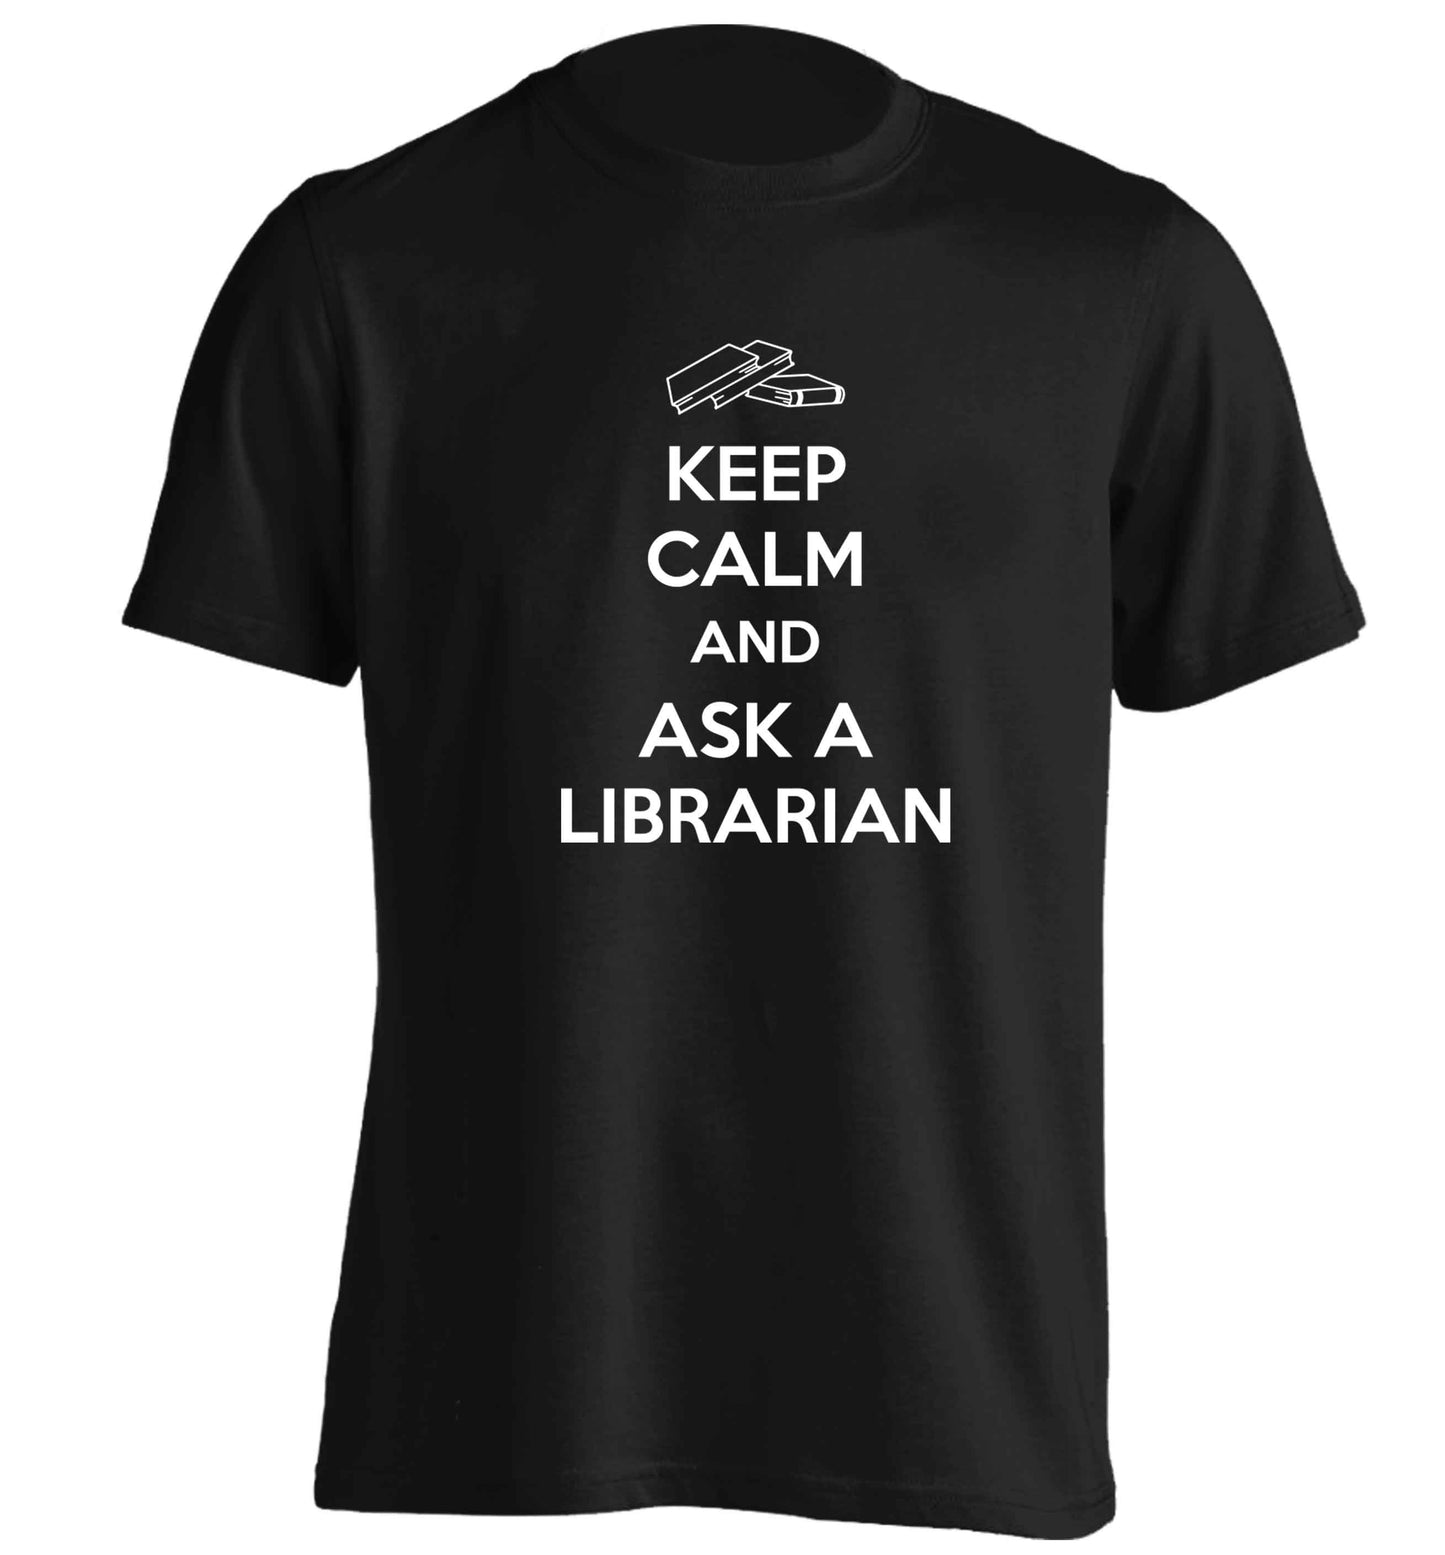 Keep calm and ask a librarian adults unisex black Tshirt 2XL